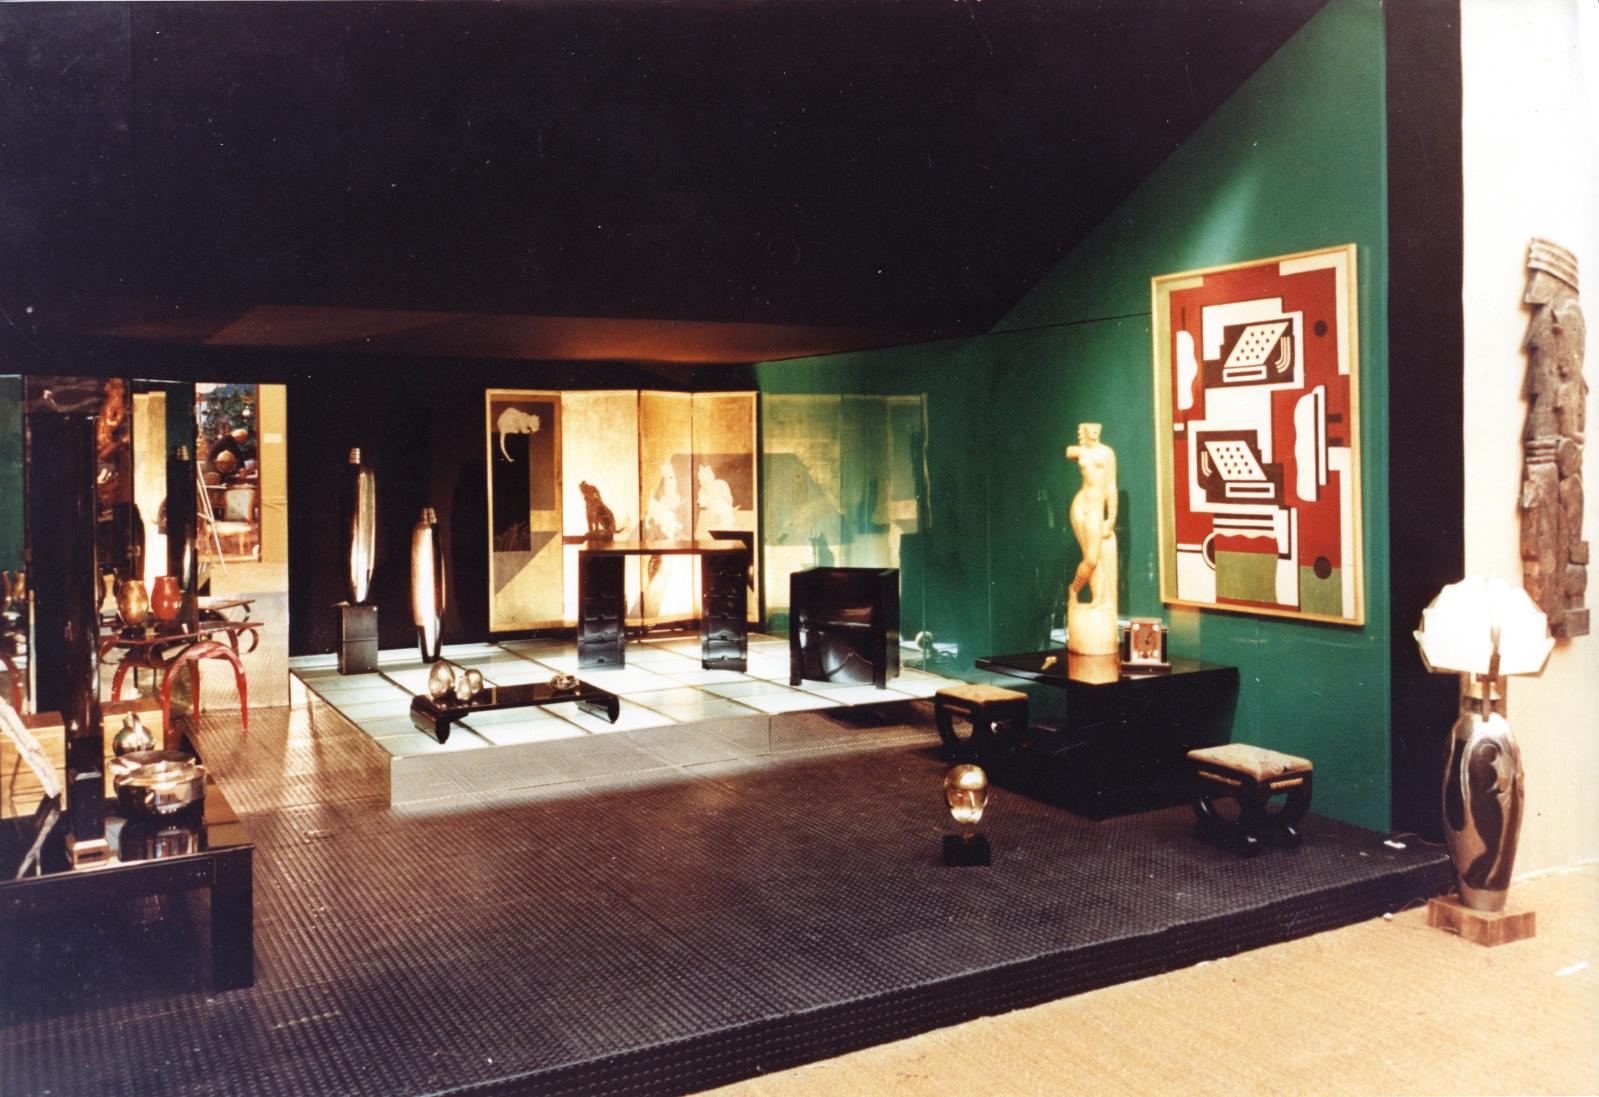 The Anne-Sophie Duval gallery stand at the Biennale des Antiquaires, in Paris, 1972, with interior design by Karl Lagerfeld. For the first